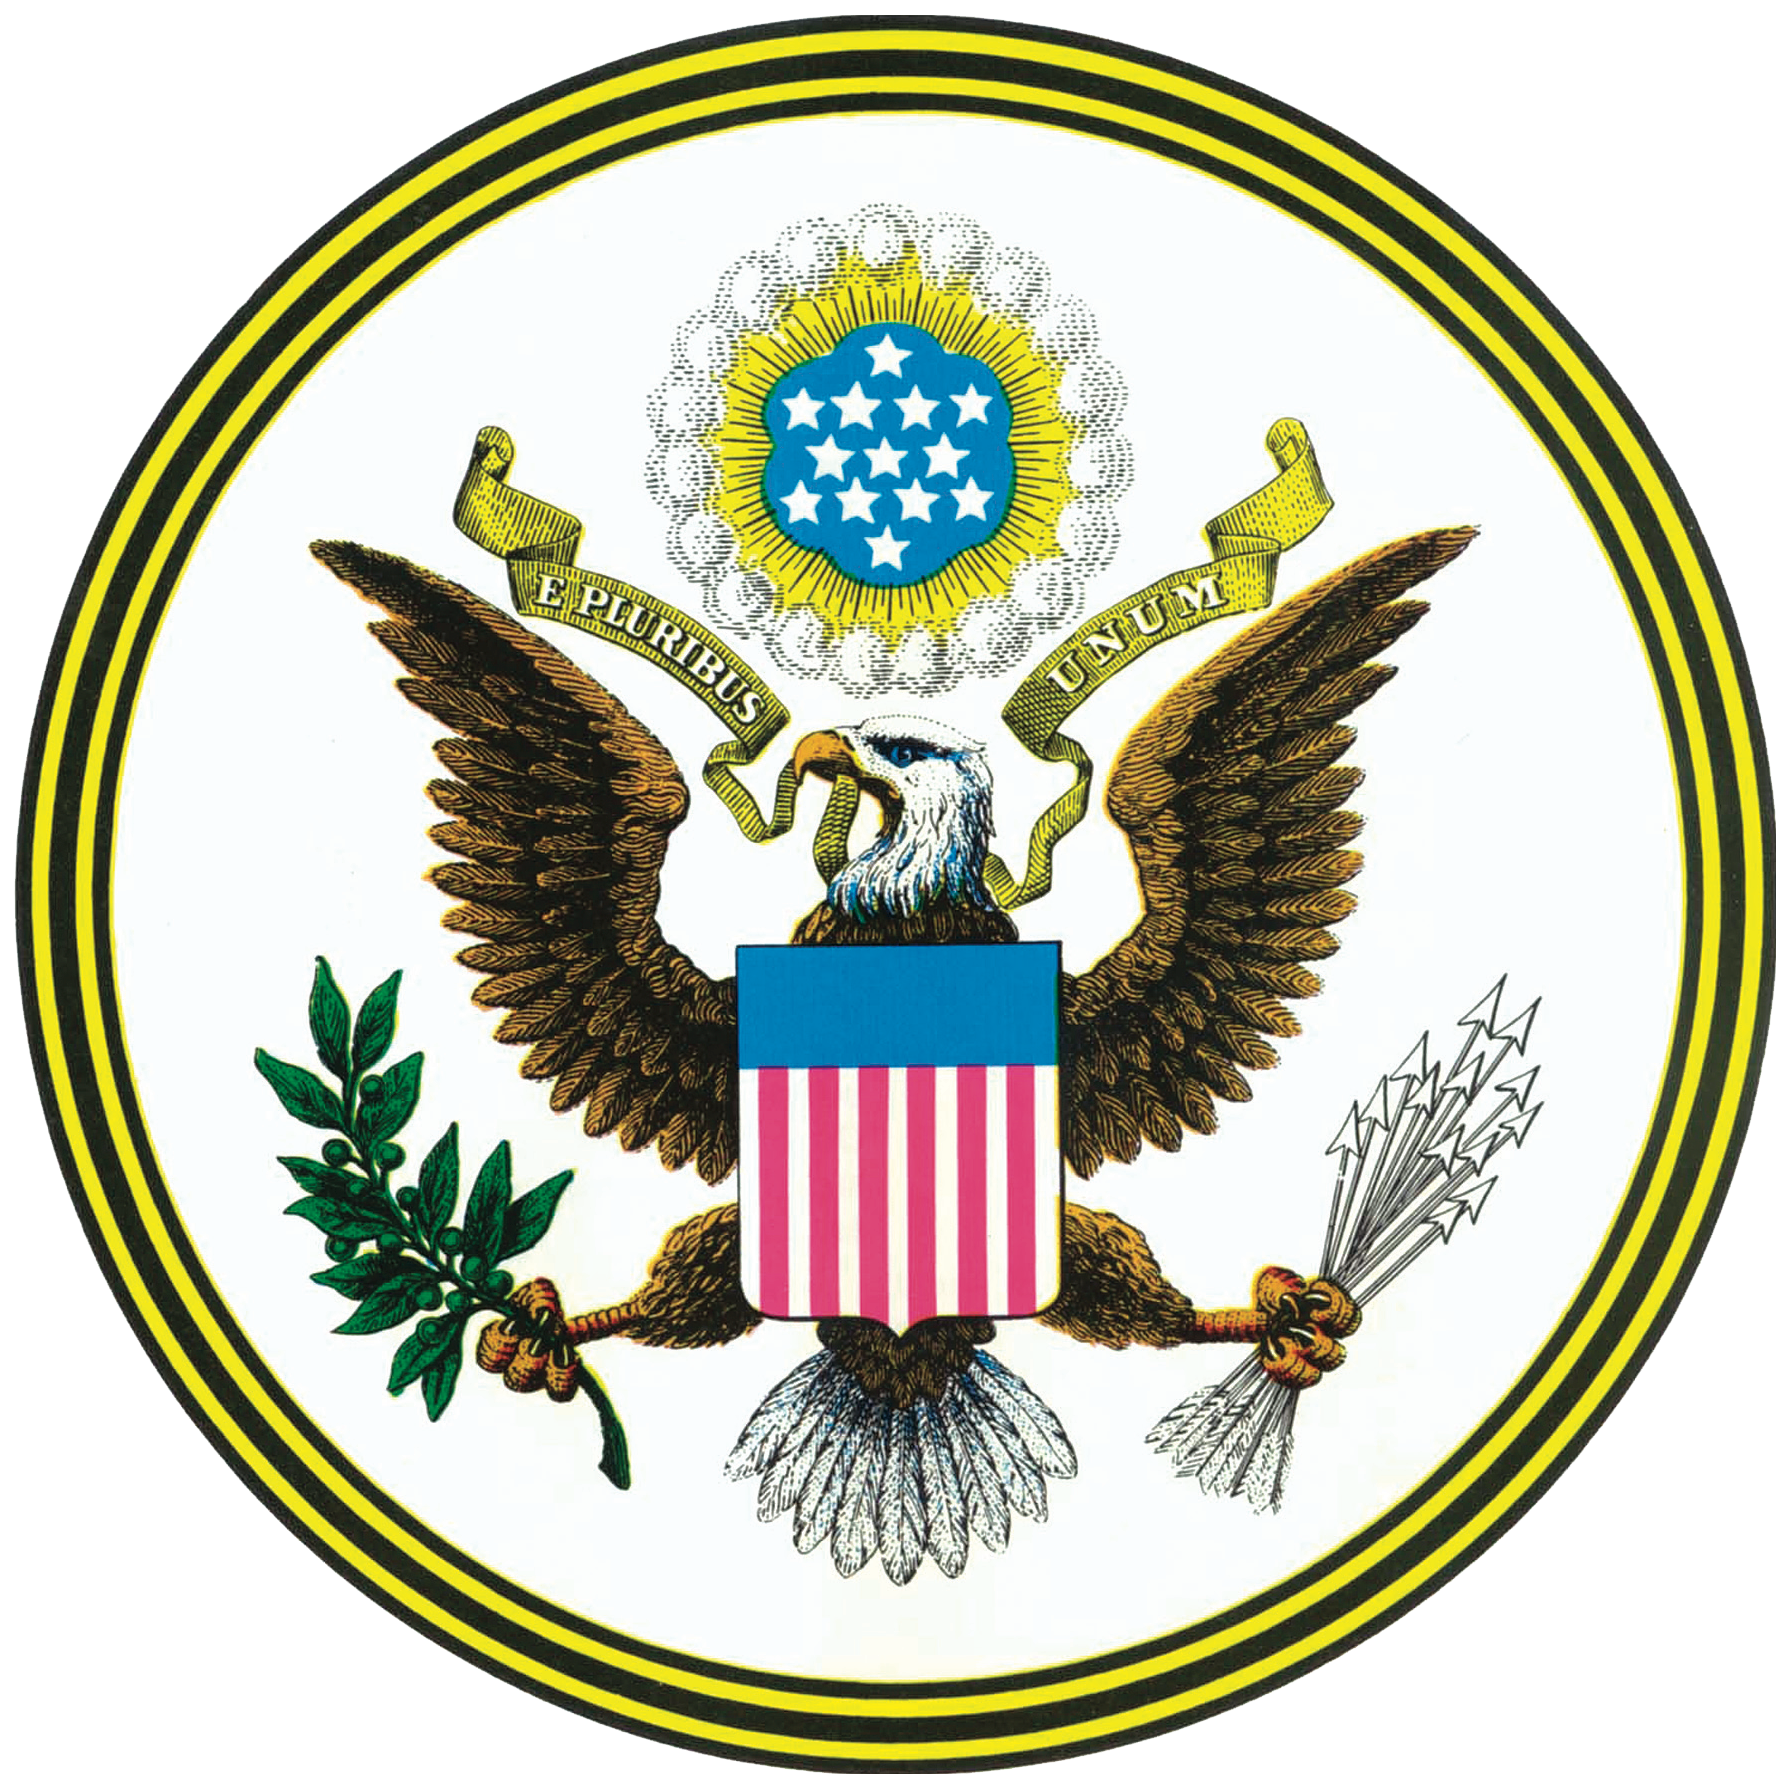 Jewish currents september the. Government clipart seal american